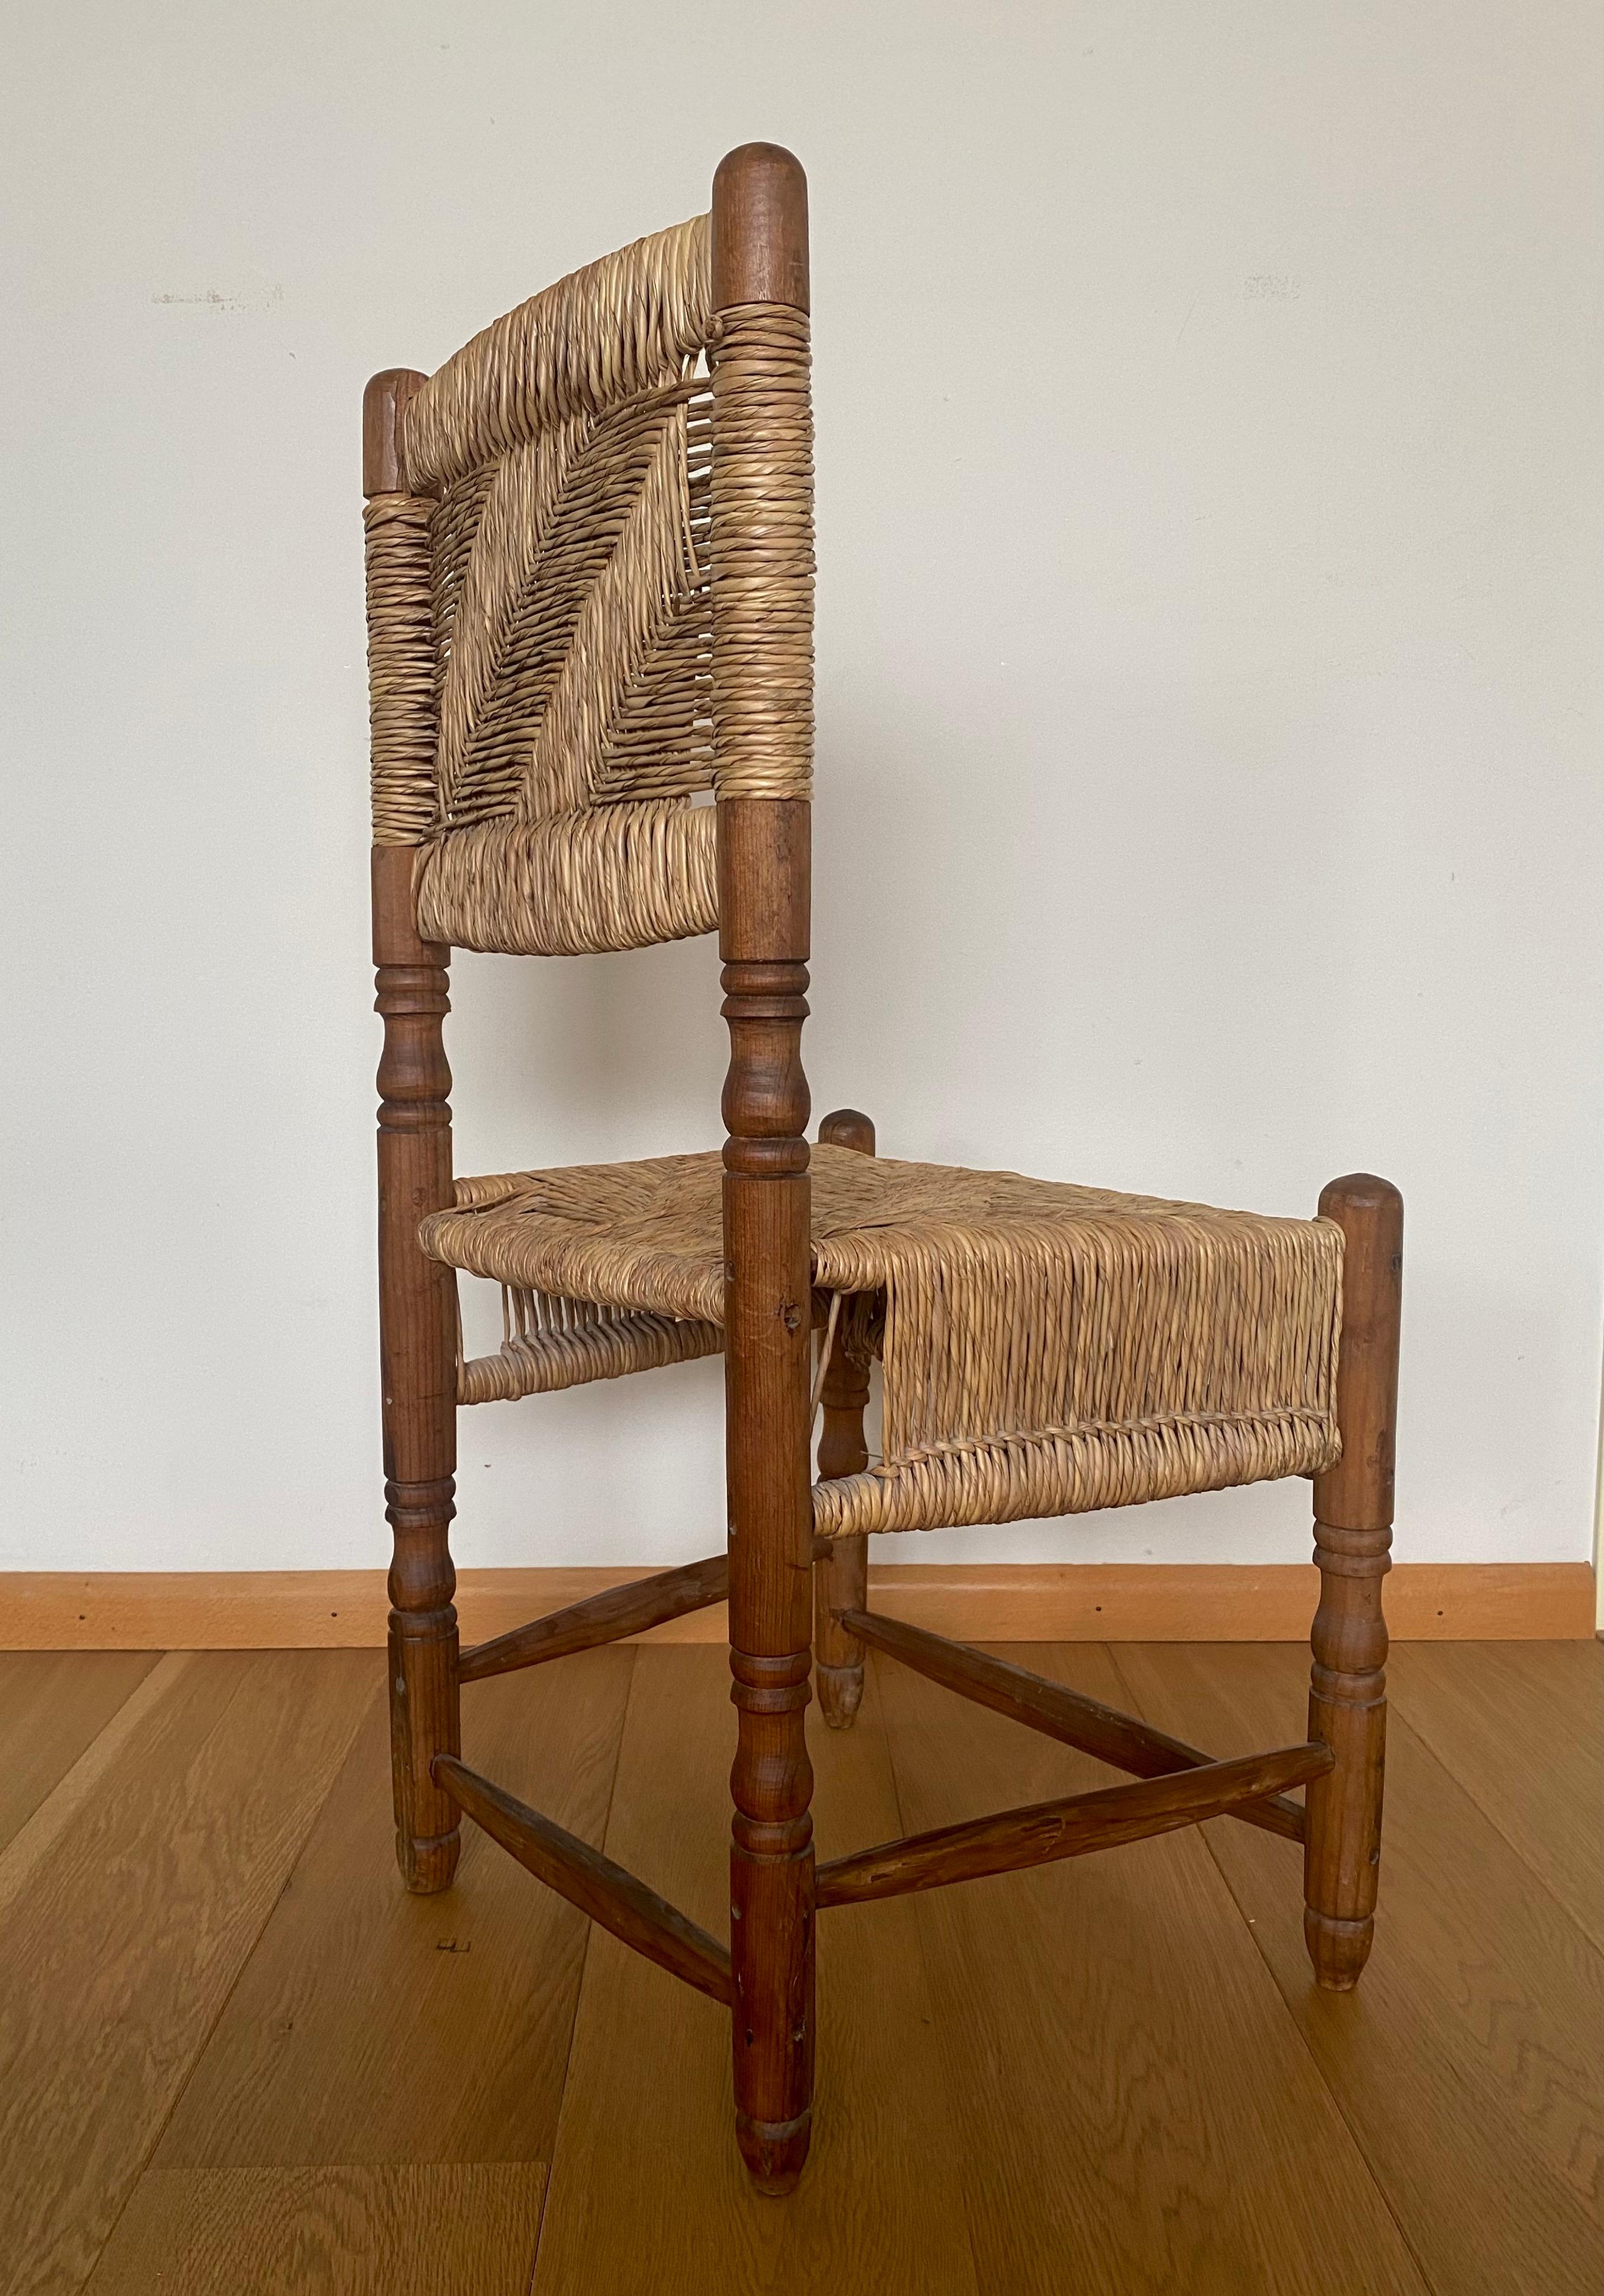 North American Rustic, Vintage, Wooden Chair with Woven Seat For Sale 1